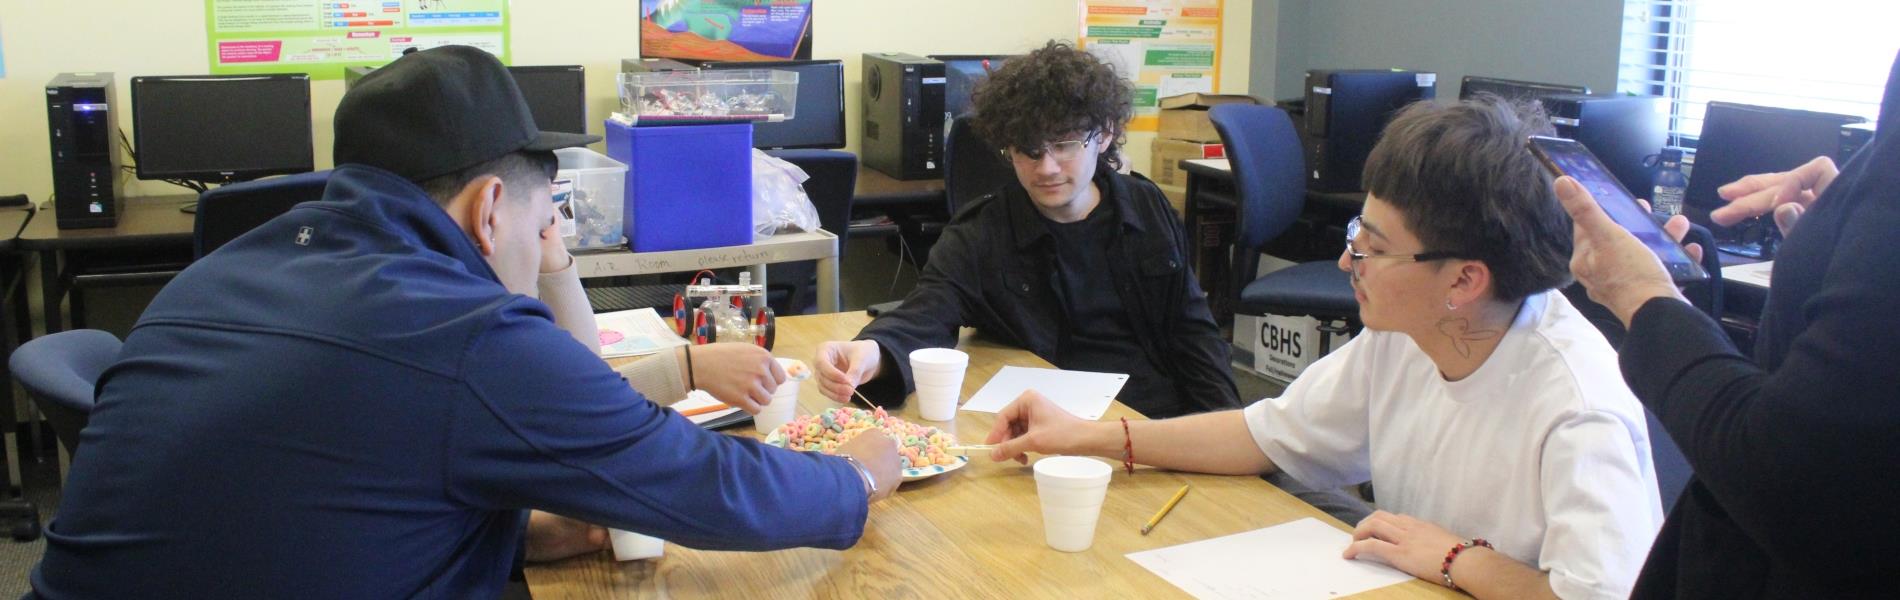 Four students sit at a table picking up cereal with objects such as a straw, toothpick, clothespin and spoon, while a teacher times them.